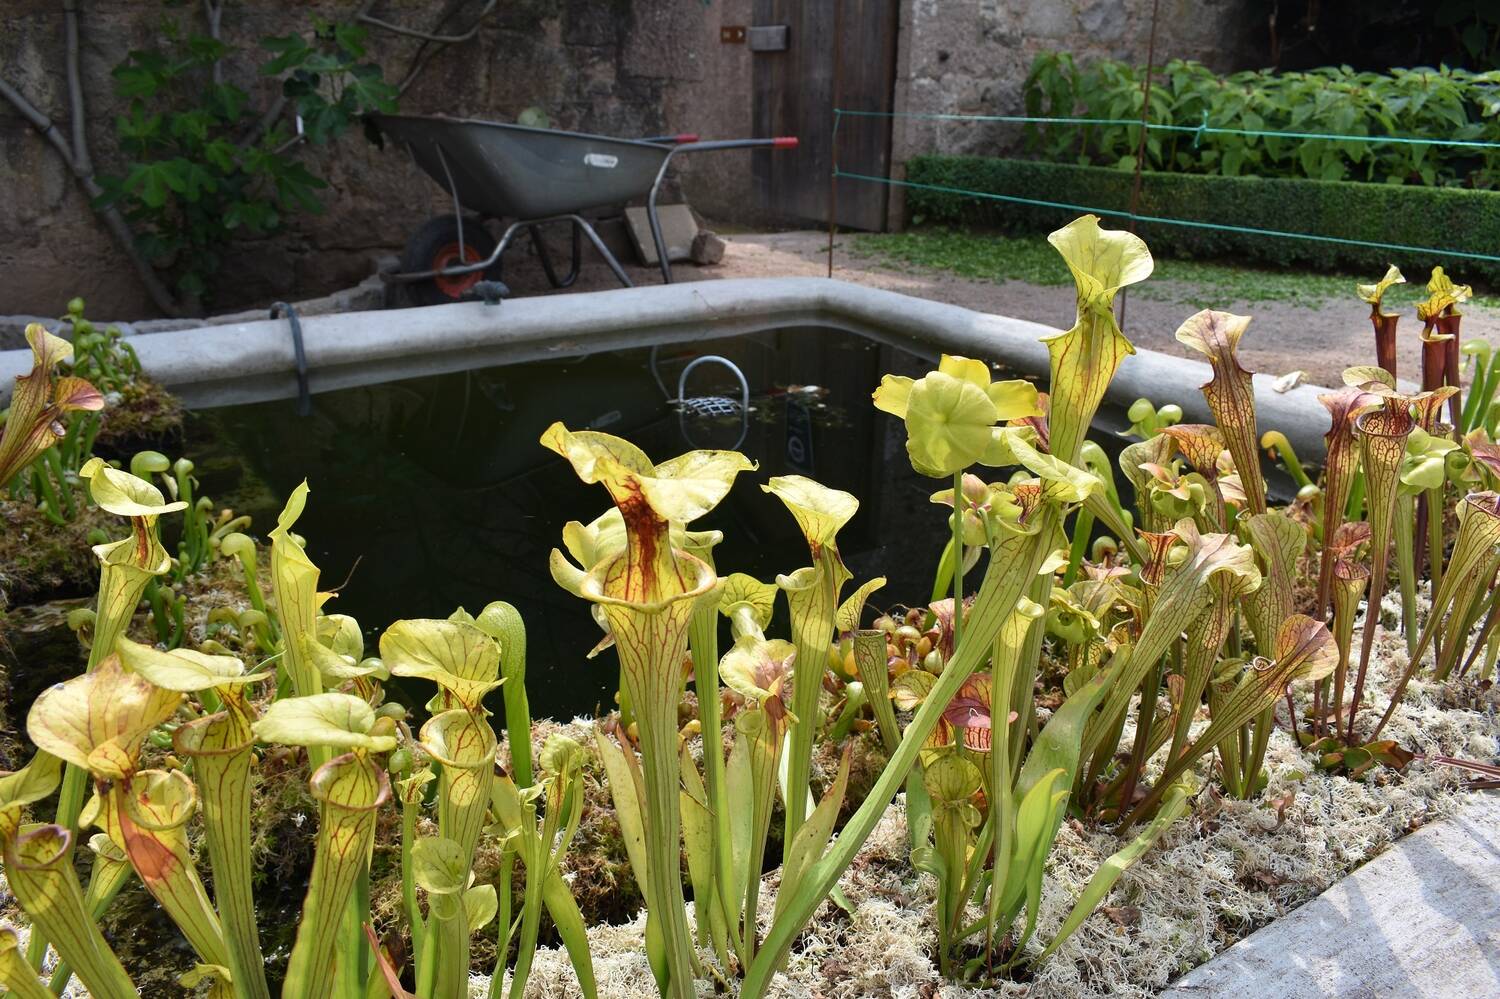 A rare of tall, slender carnivorous plants grow beside a pool in a garden. The plants are shaped a bit like long, thin trumpets, and are growing in a bed of white moss.